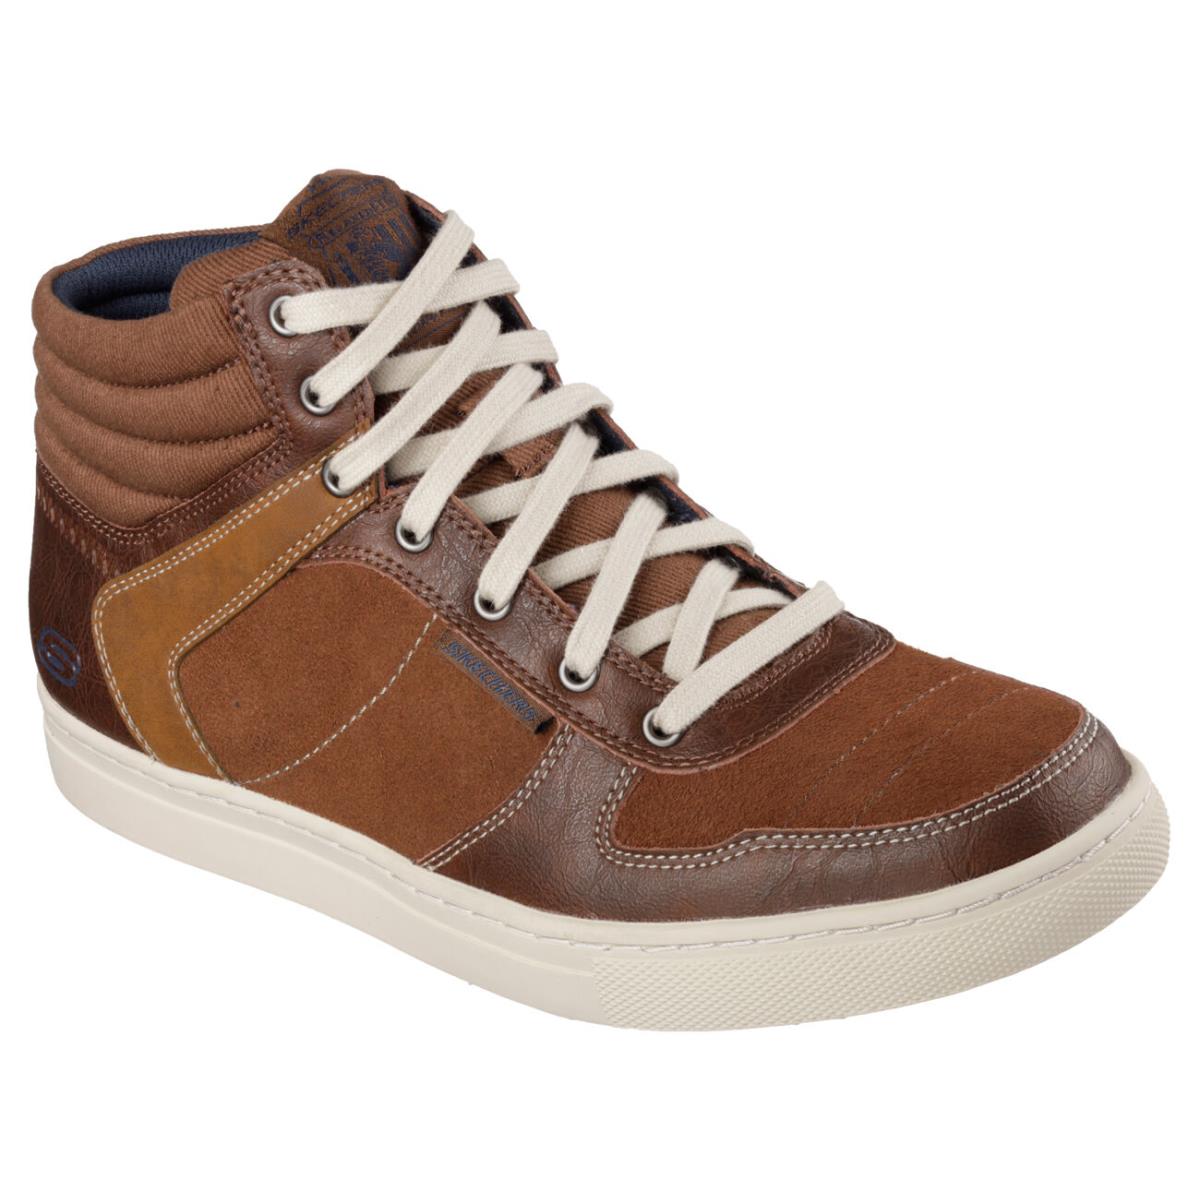 Men`s Skechers Relaxed Fit: Elvino - Staley Casual Shoe 64792 Lug Sizes 8-14